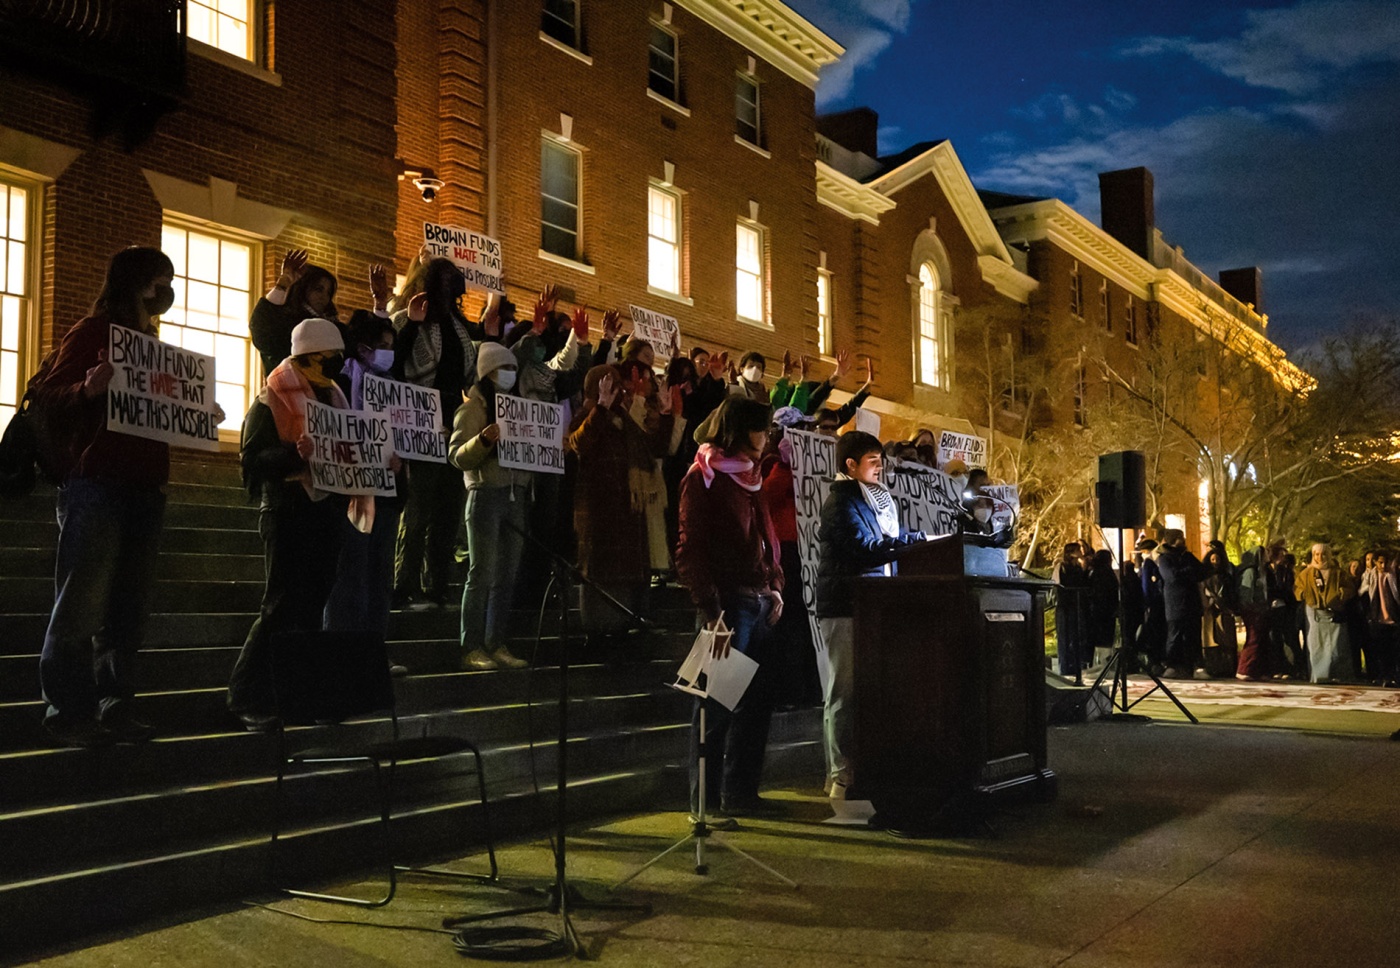 Image of students holding up signs and protesting at night with a student in front of a podium speaking in front of University Hall at Brown University